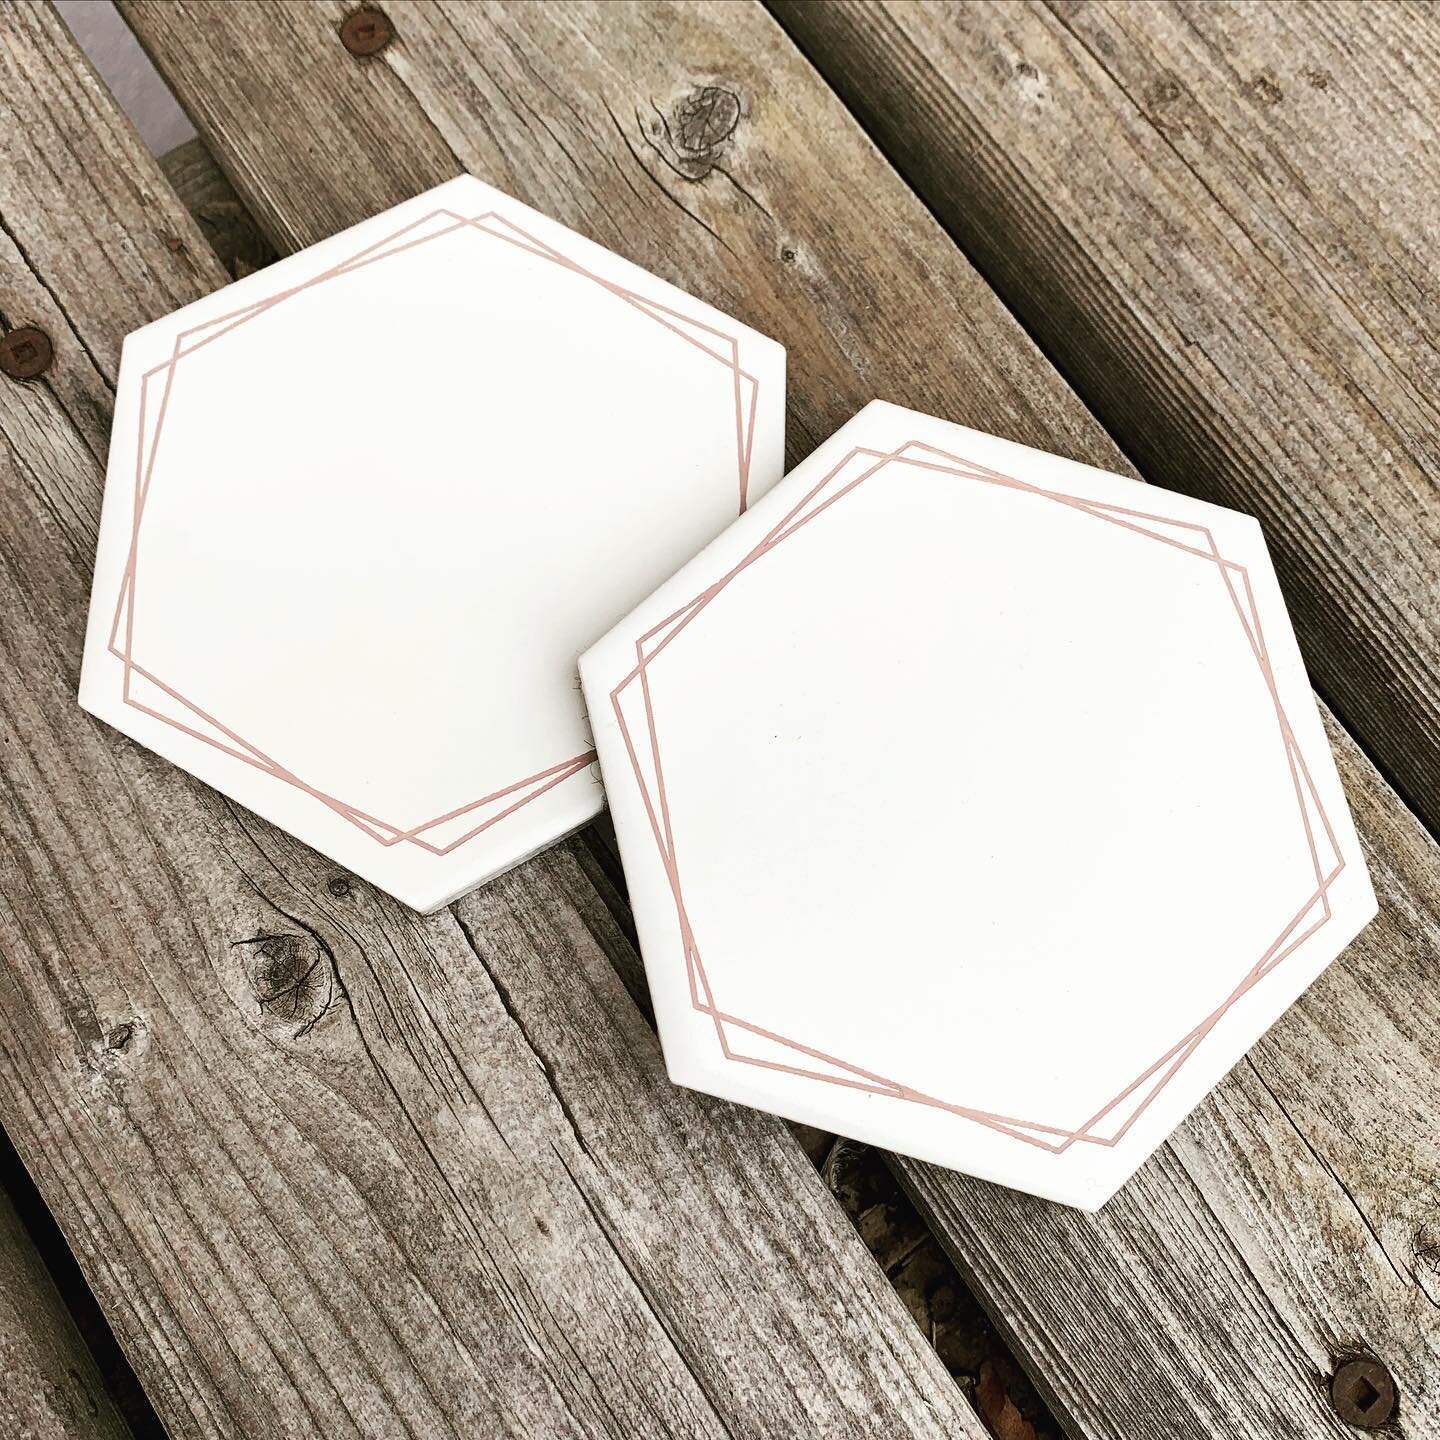 Some custom coasters I am absolutely in LOVE with! 🥰 
.
.
.
#rijiddesigns #coasters #porcelain #handmade #smallbusiness #gta #local #supportlocal #womensupportingwomen #womeninbusiness #enterpreneur #womenentrepreneurs #laserengraved #painted #geome